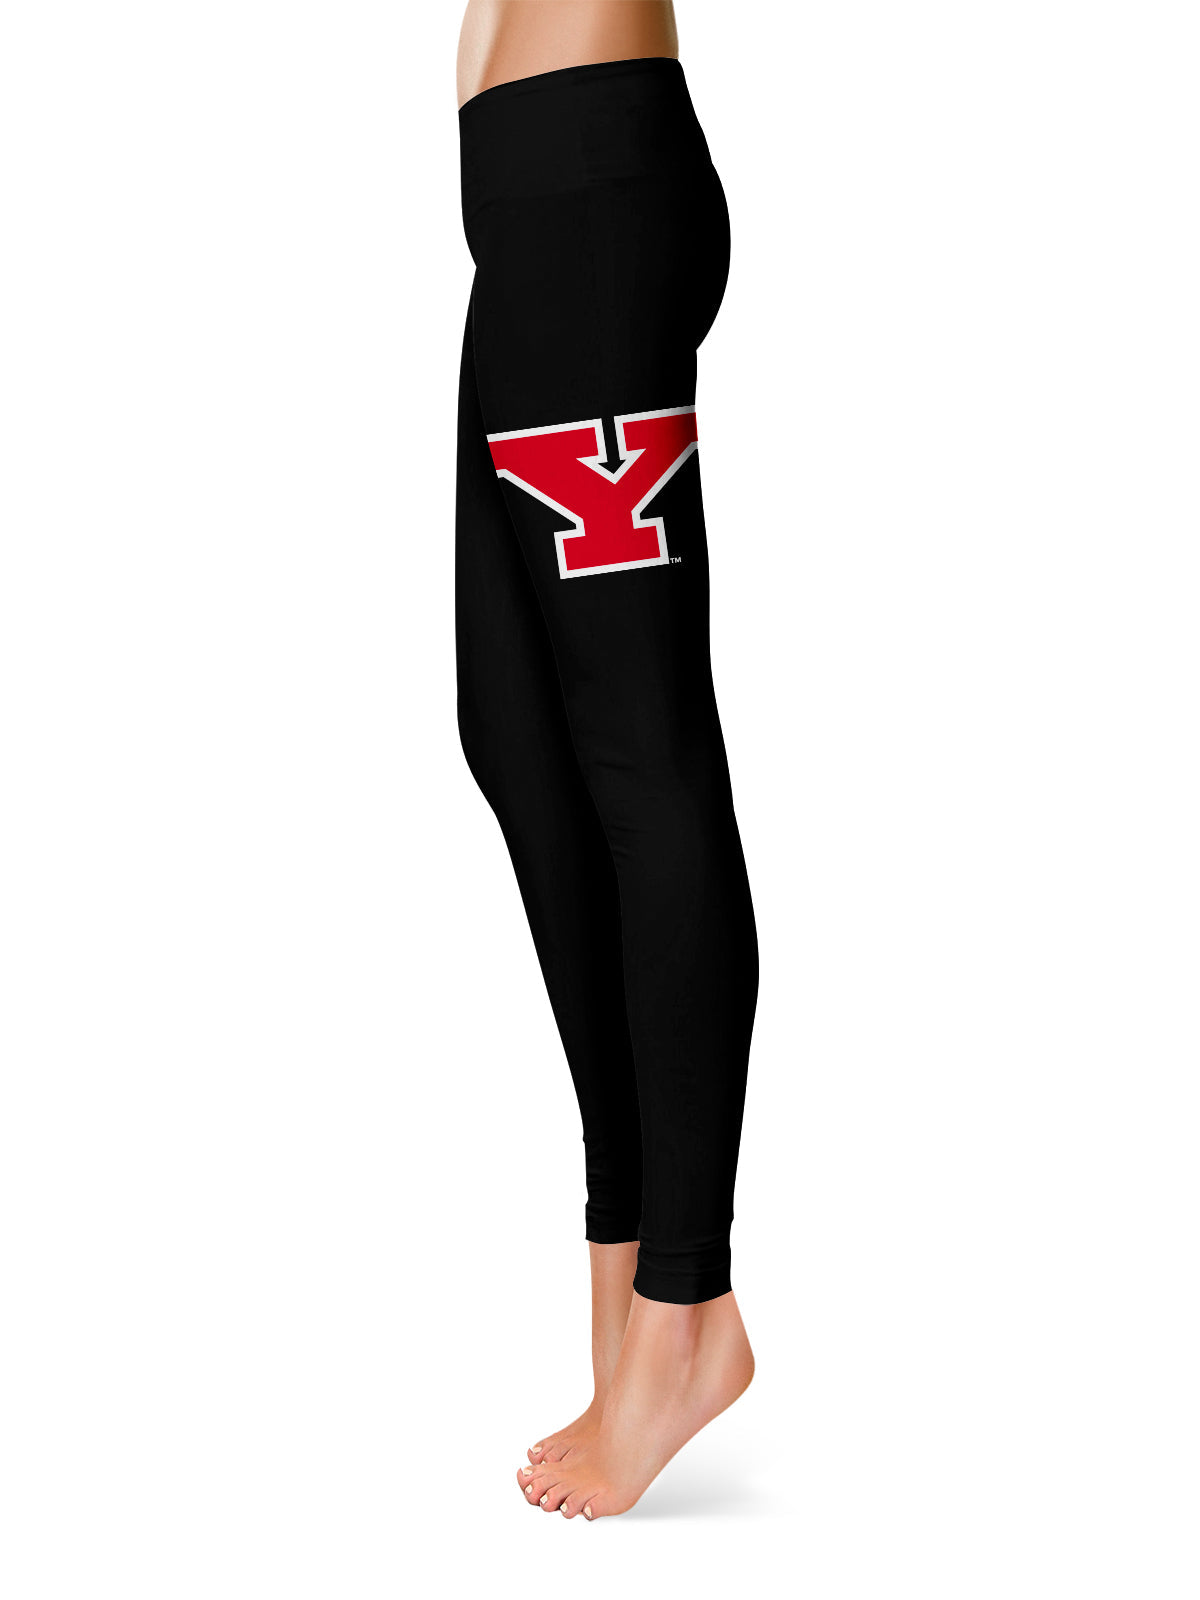 Youngstown State Penguins Large Logo on Thigh Black Yoga Leggings